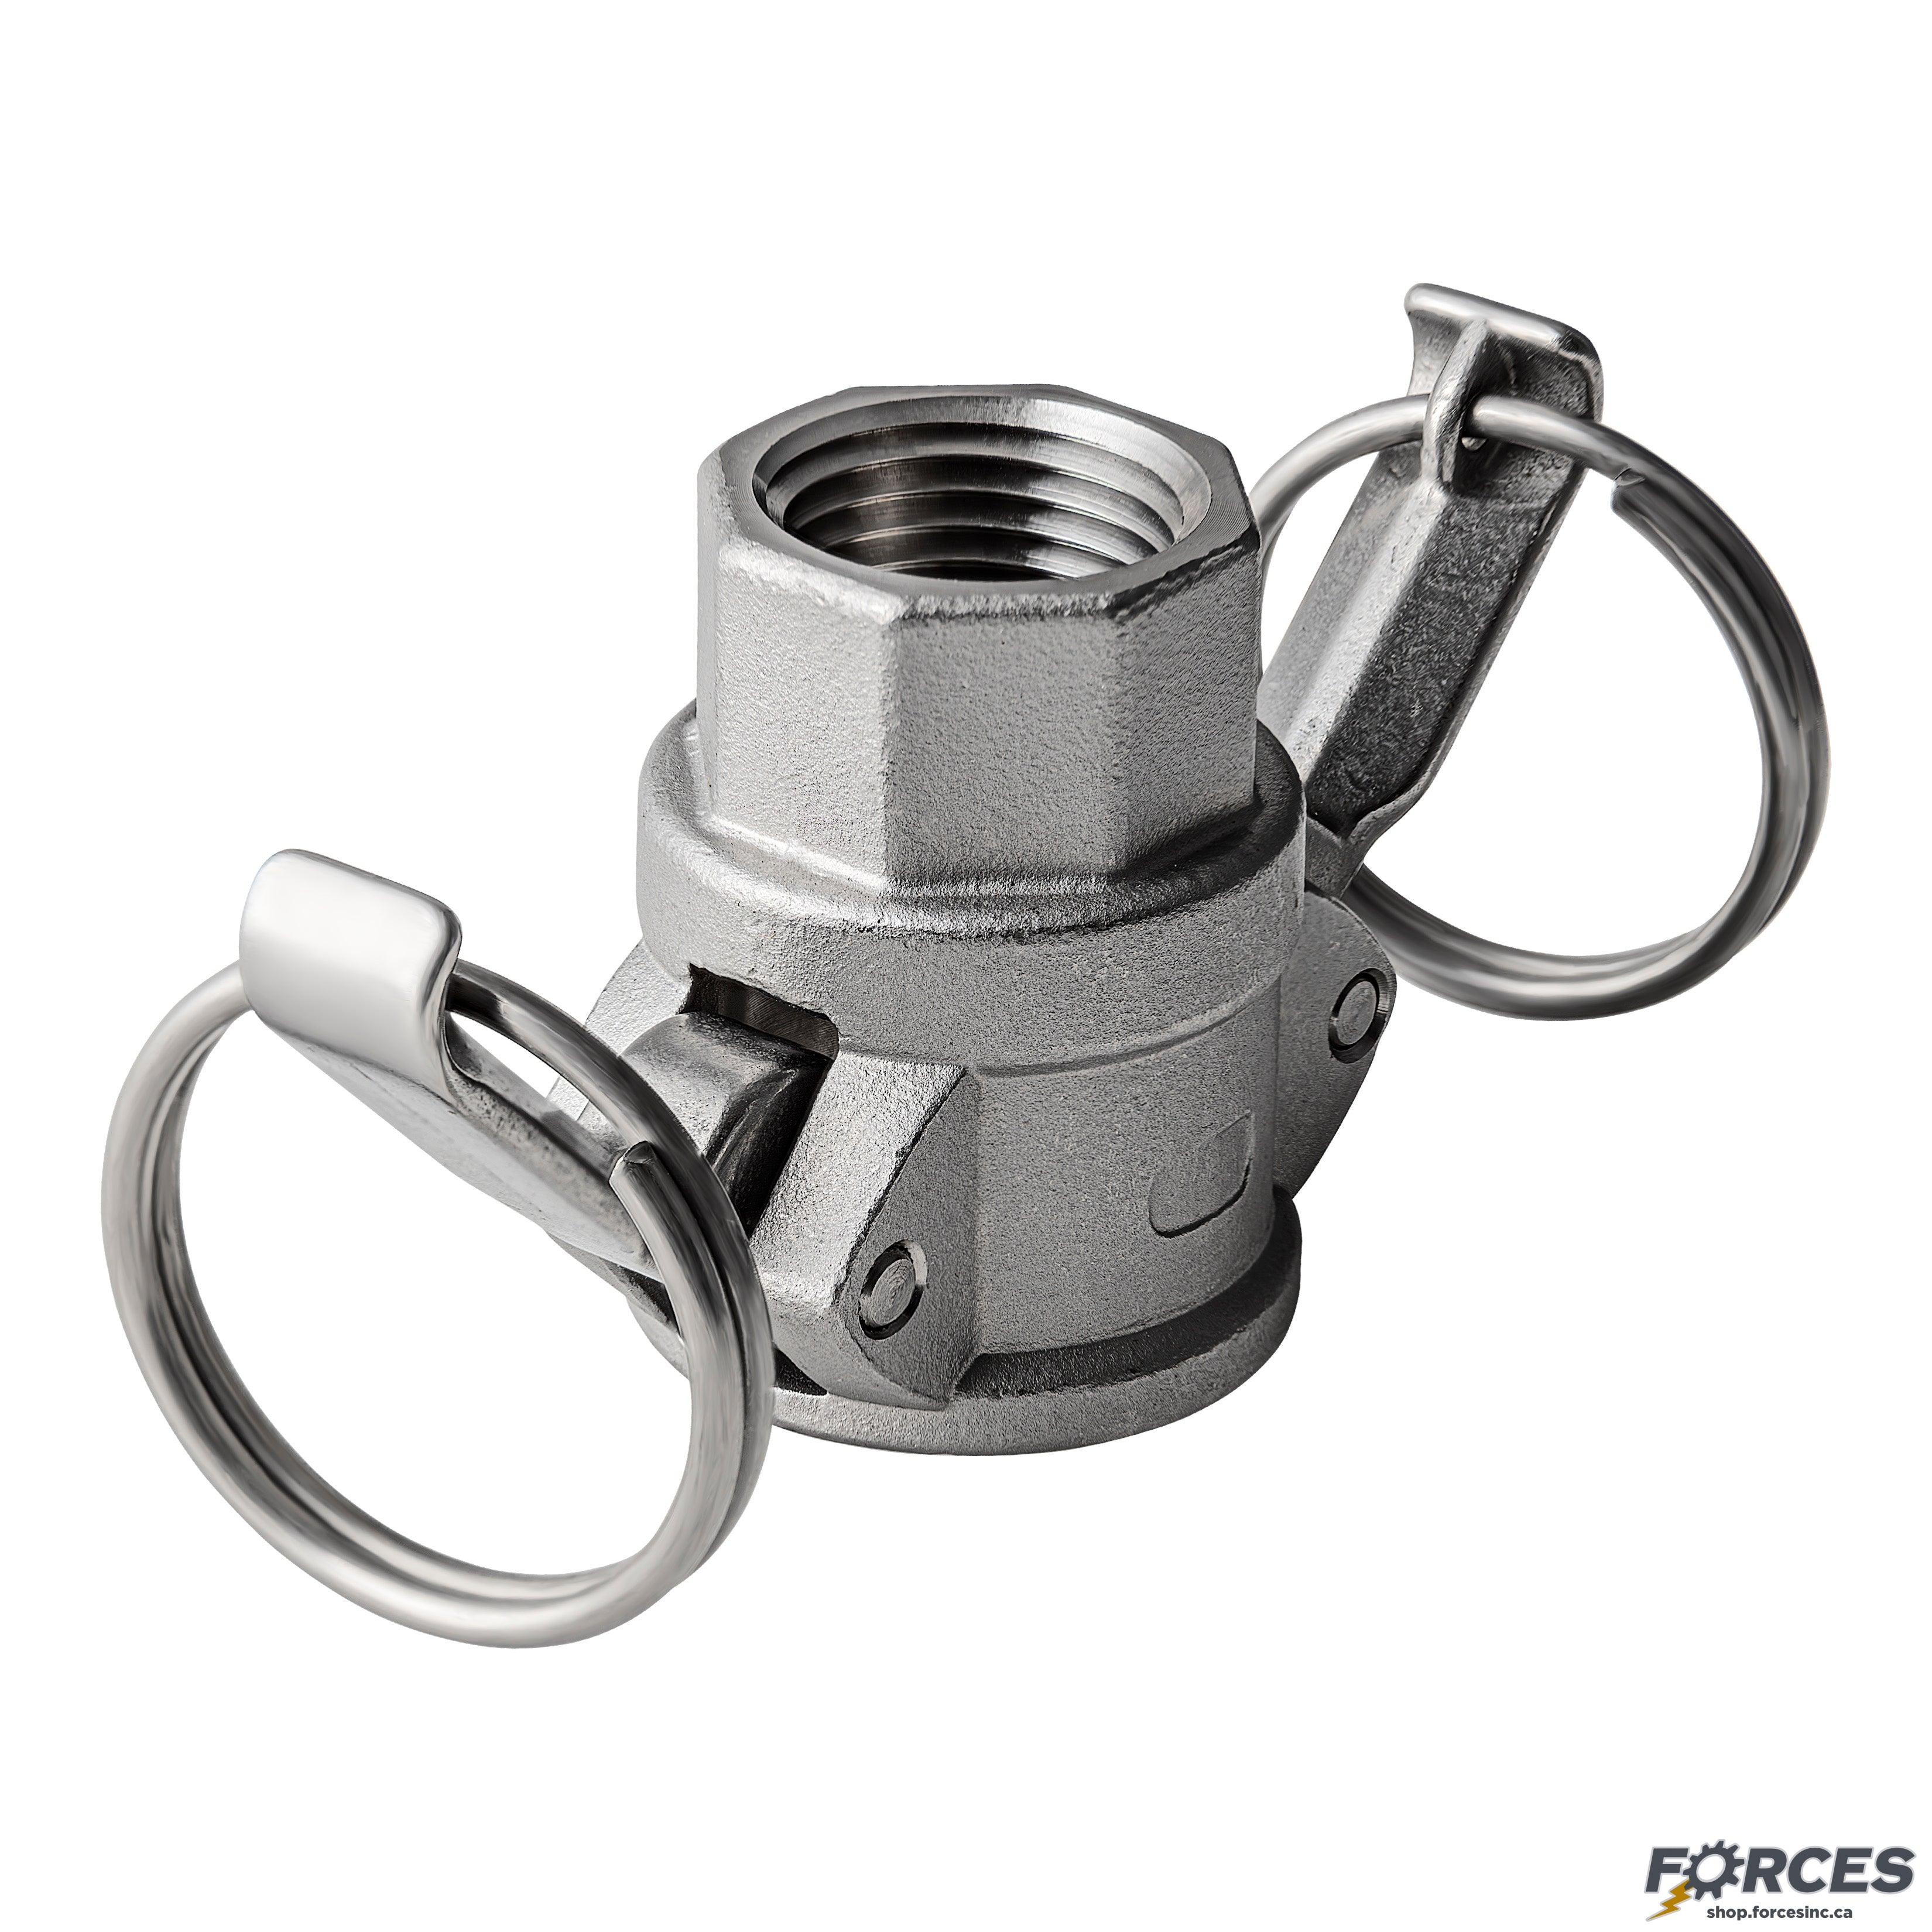 1-1/2" Type D Camlock Fitting Stainless Steel 316 - Forces Inc